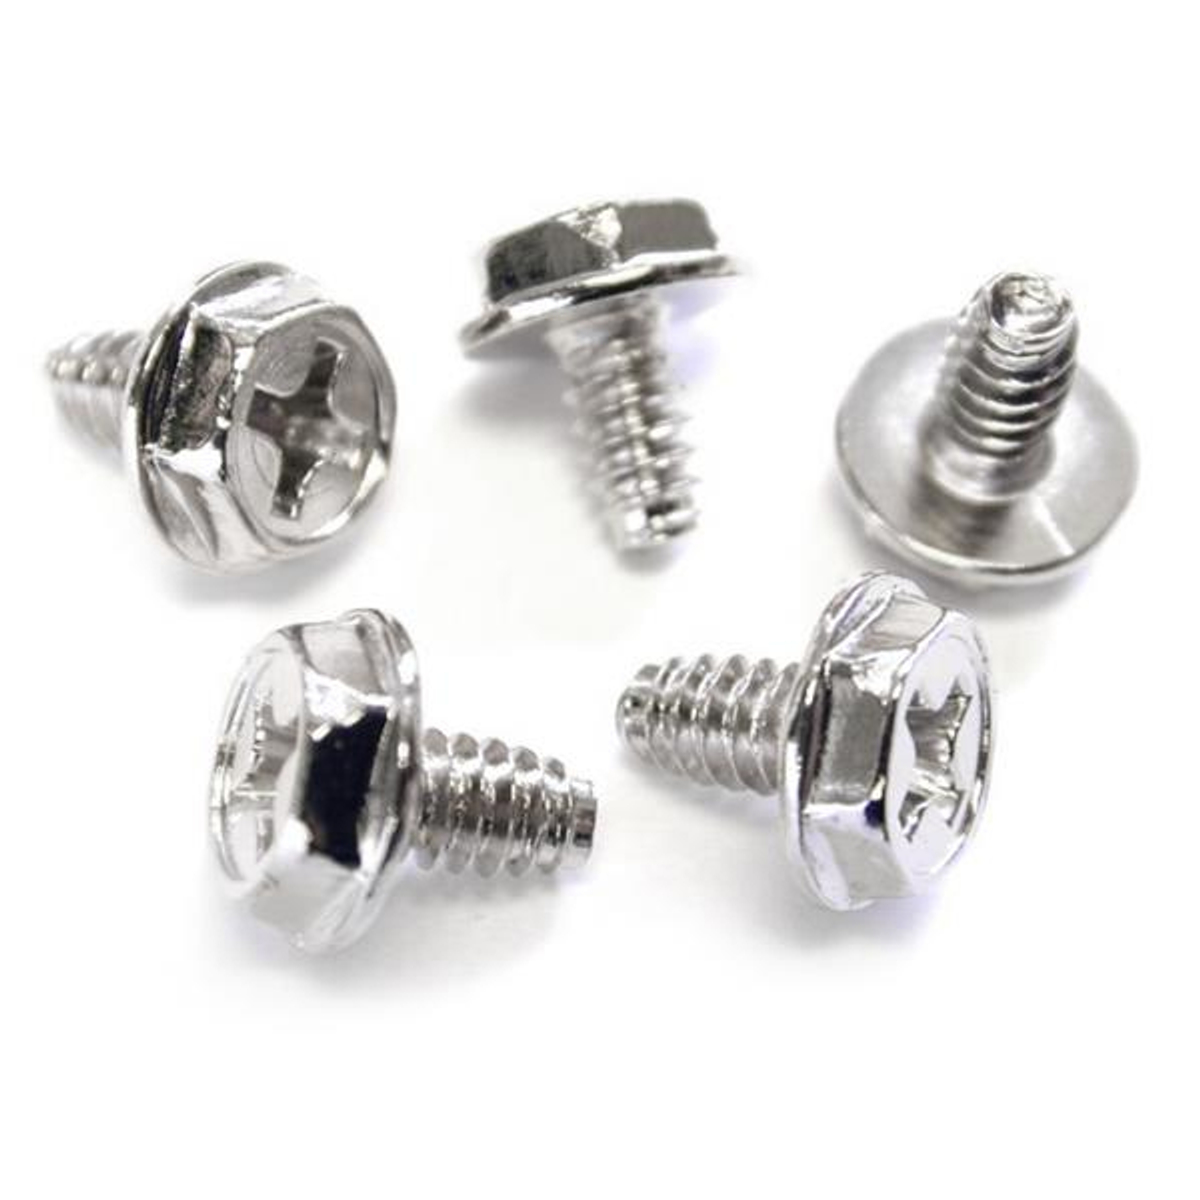 PC Mounting Screws-32 x 1/4in